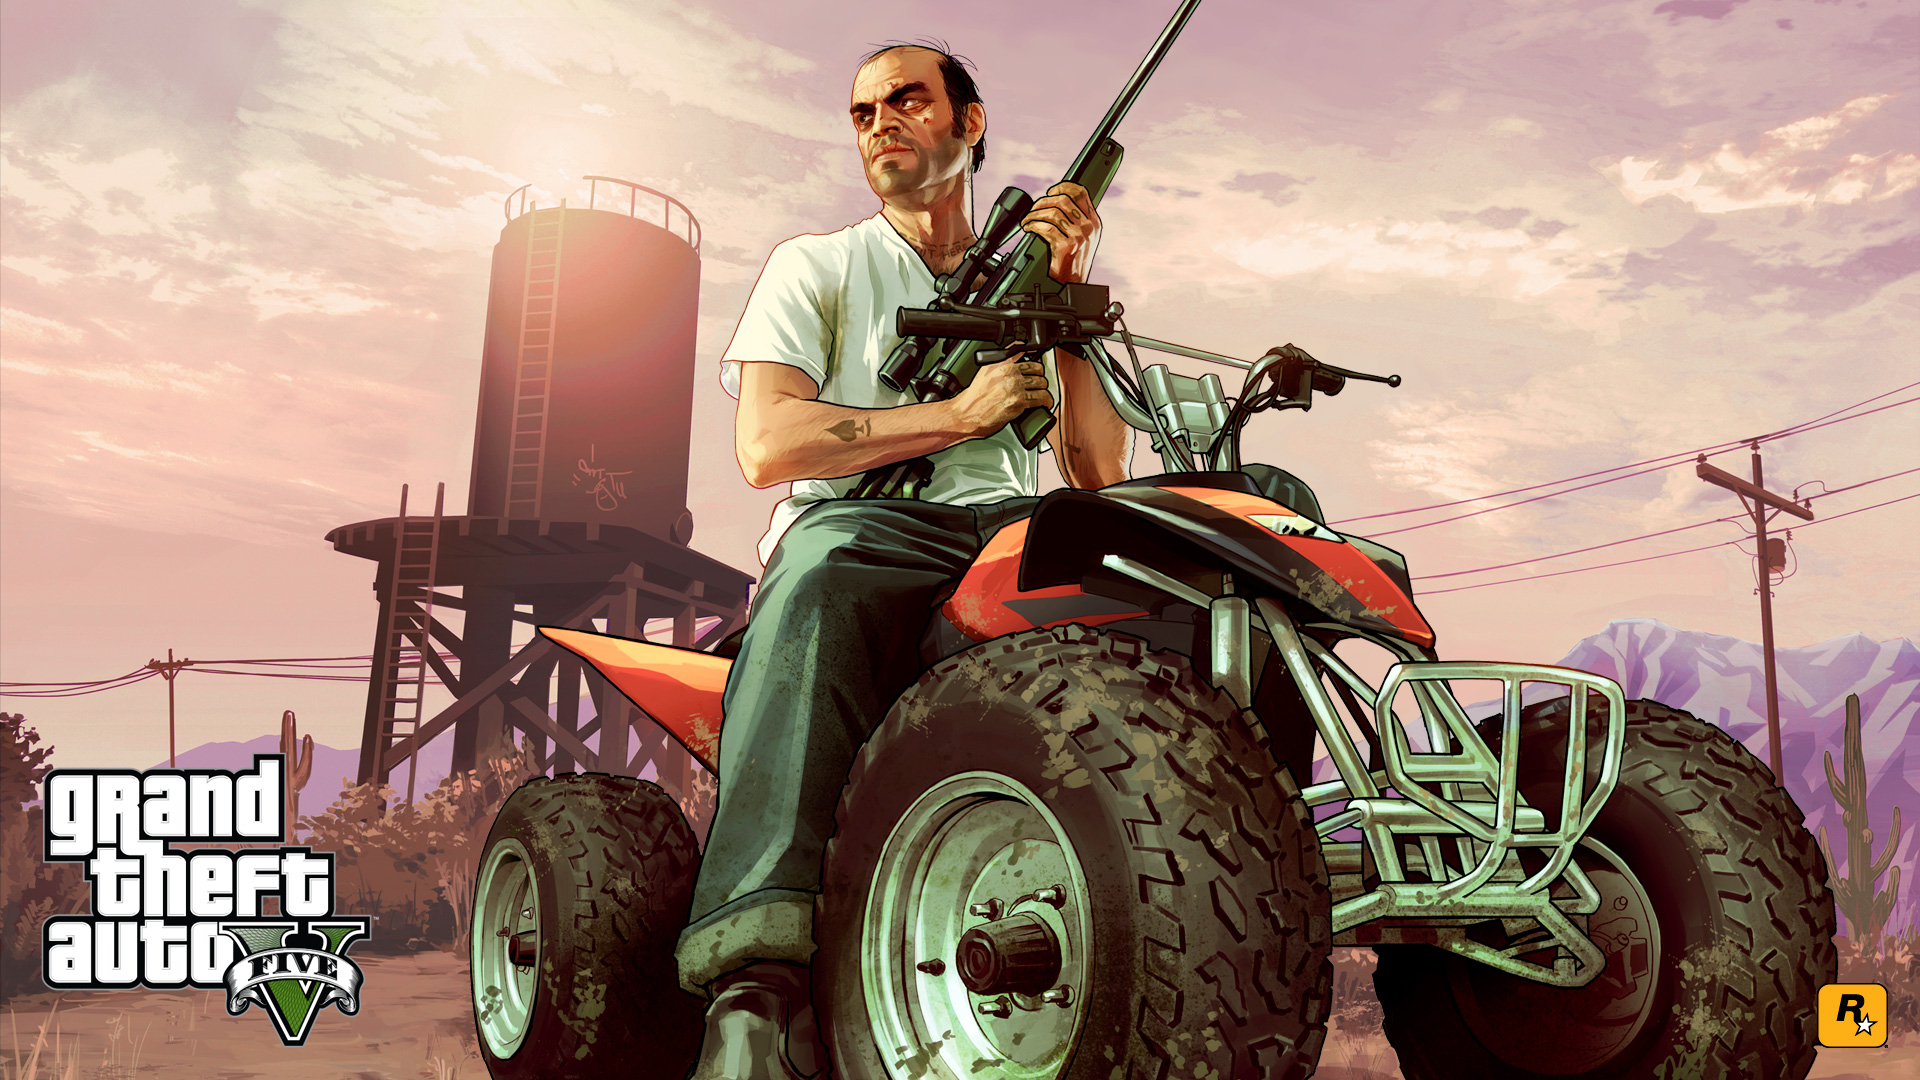 gta 5 game download for pc free full version